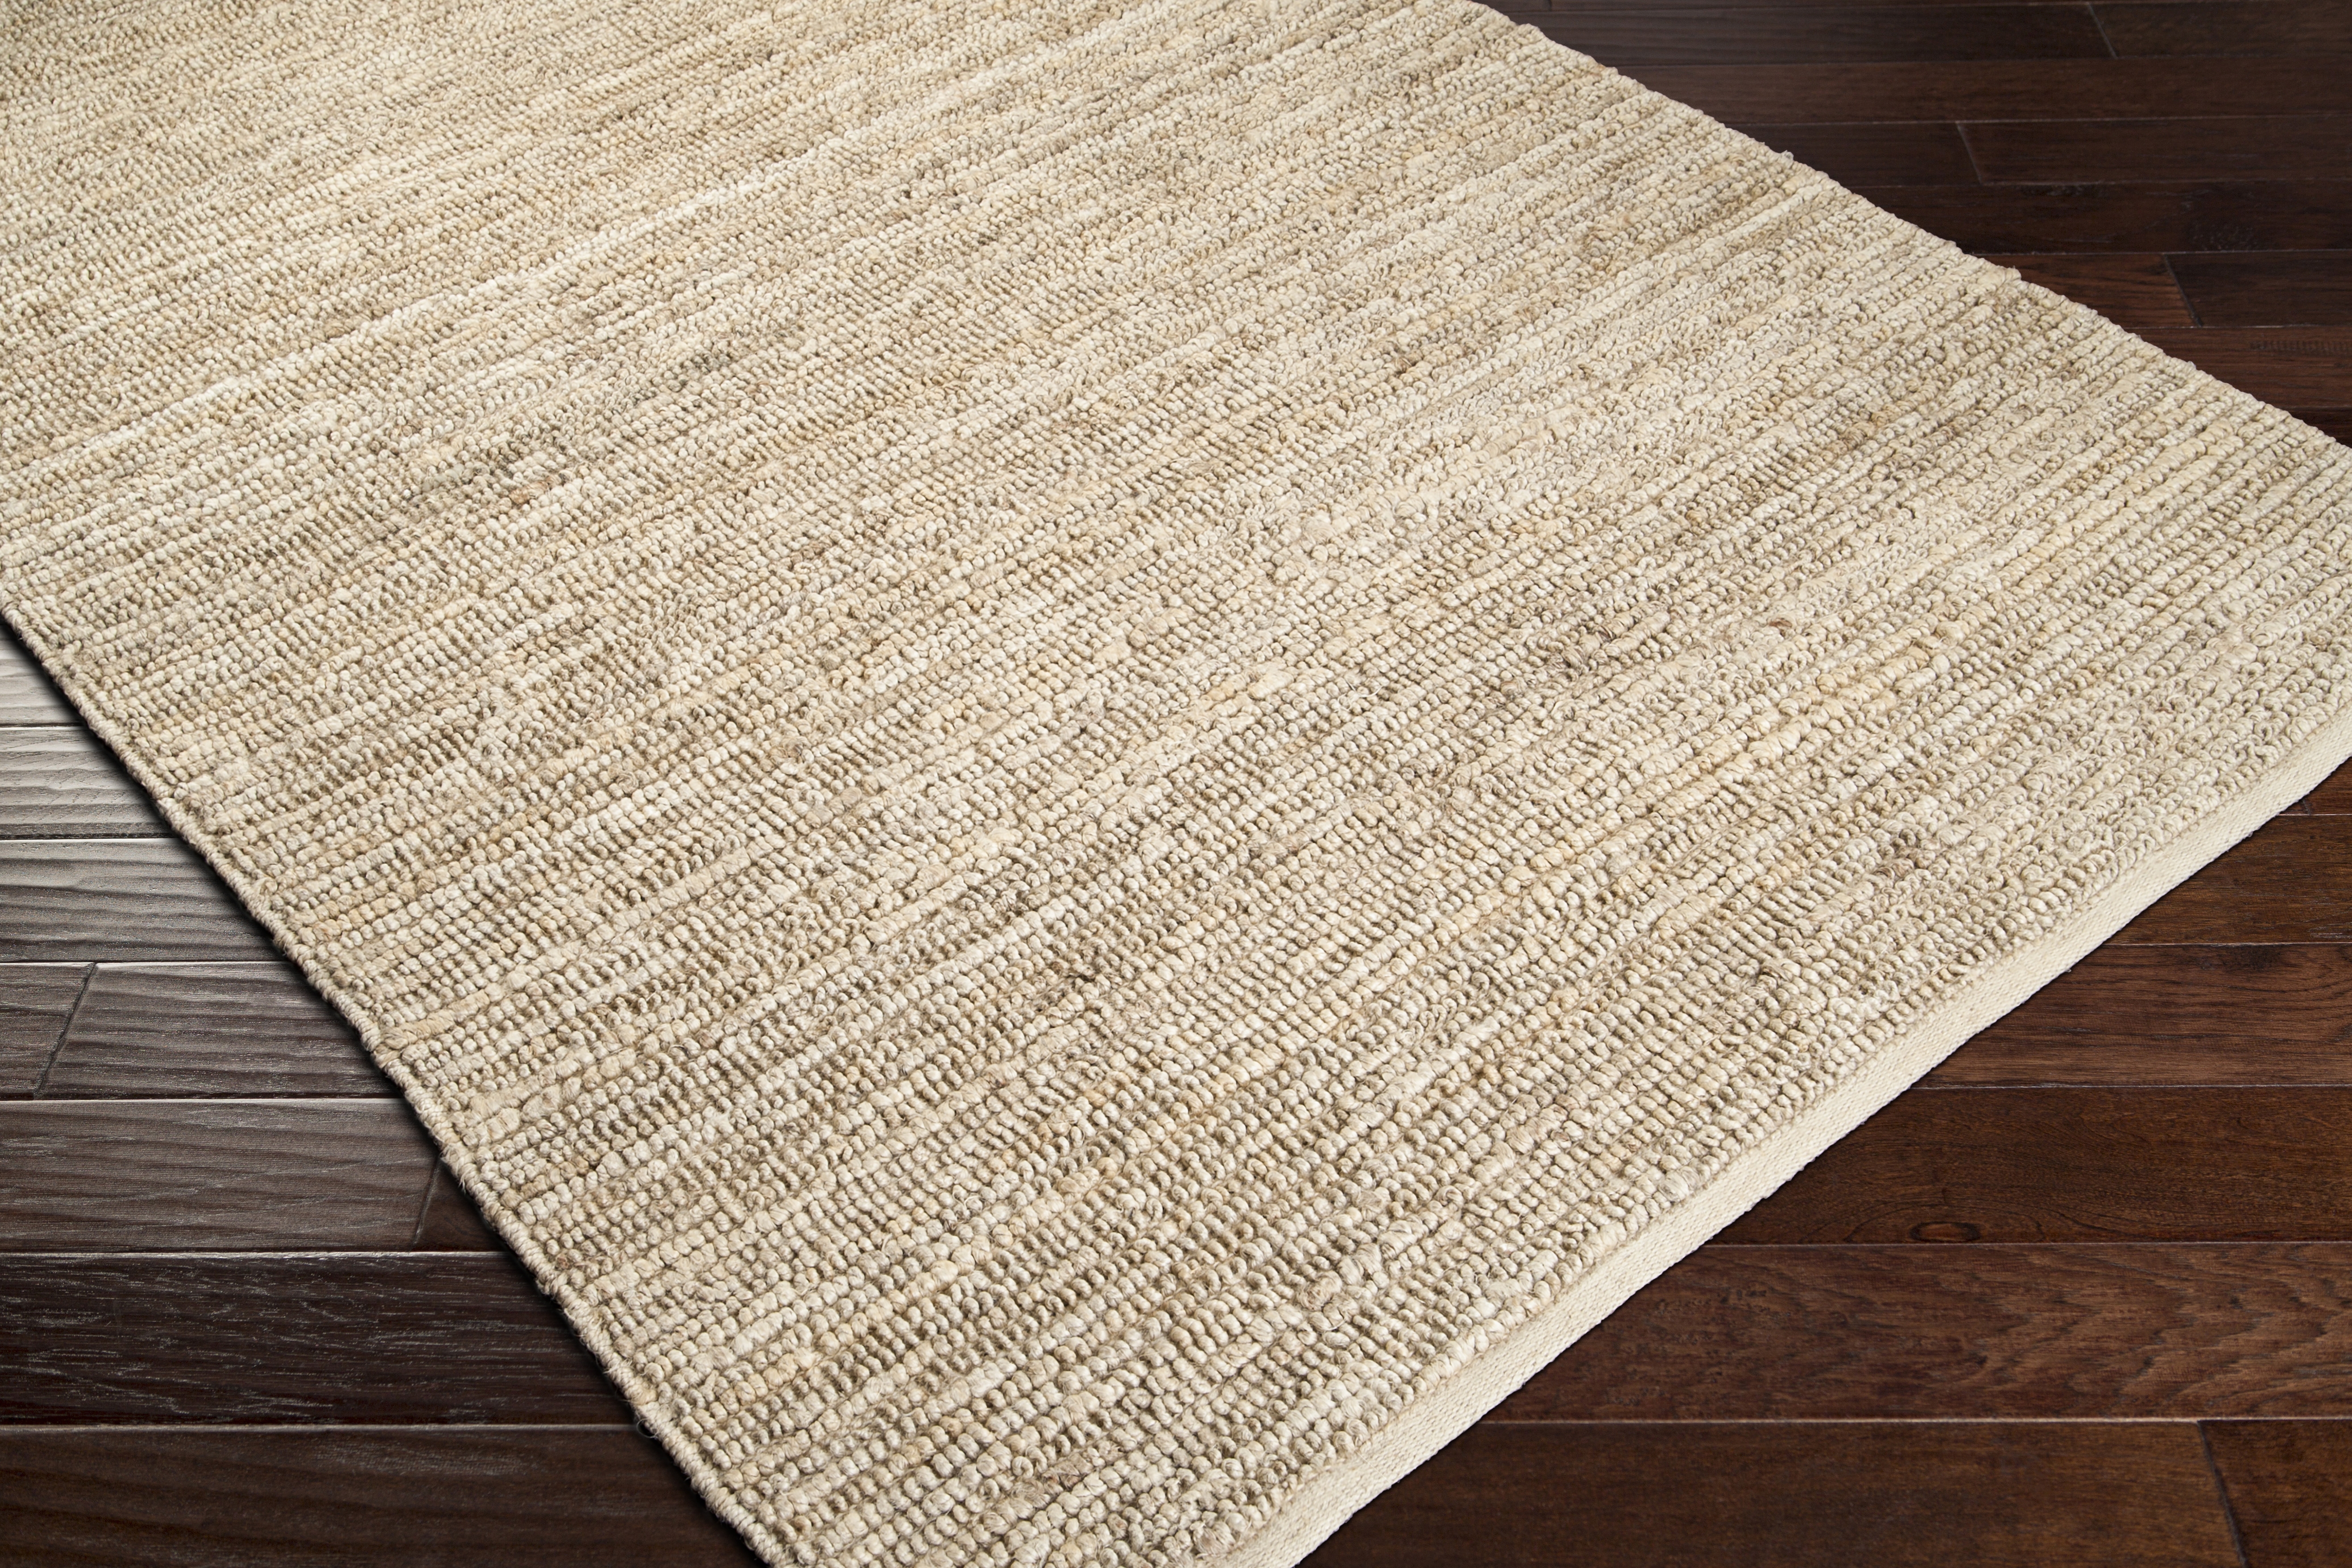 Continental Rug, 10' x 14' - Image 6